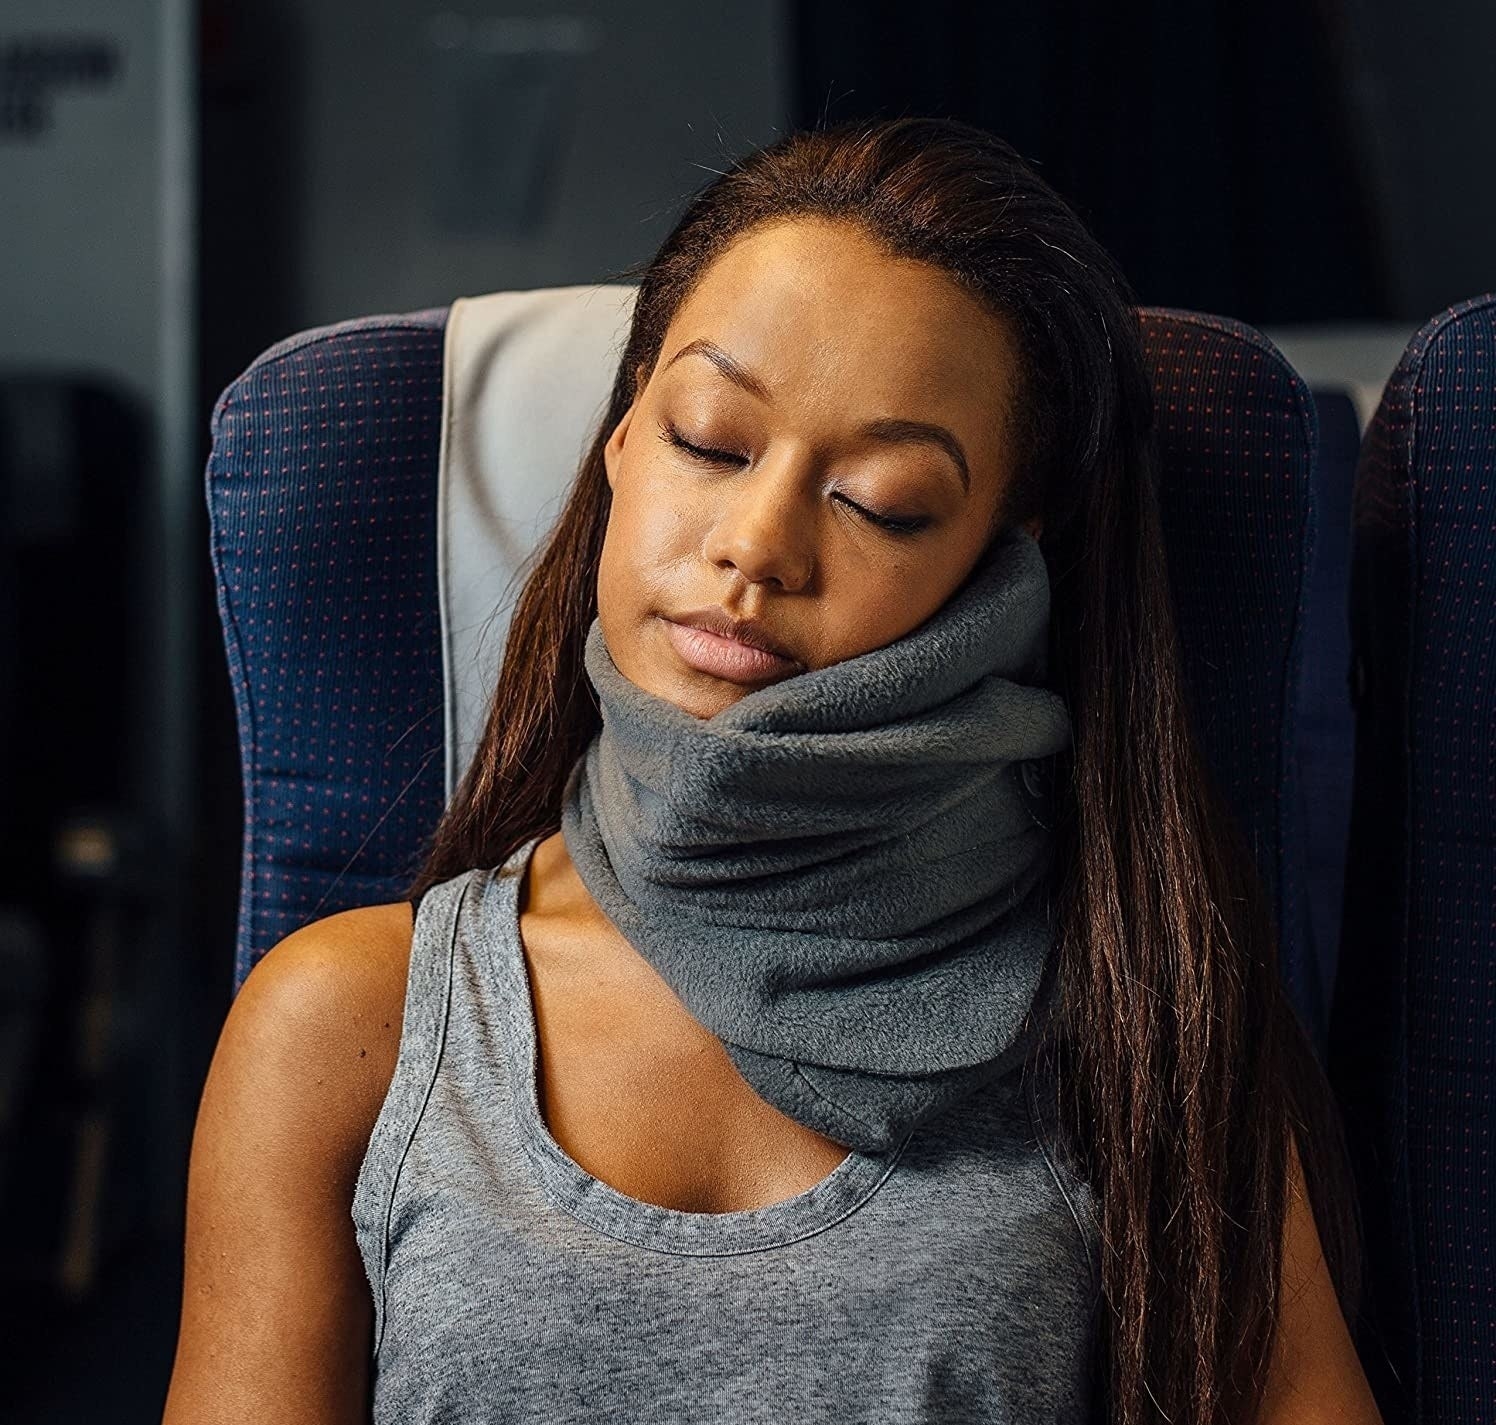 Model wearing a gray Trtl pillow while sleeping on a plane